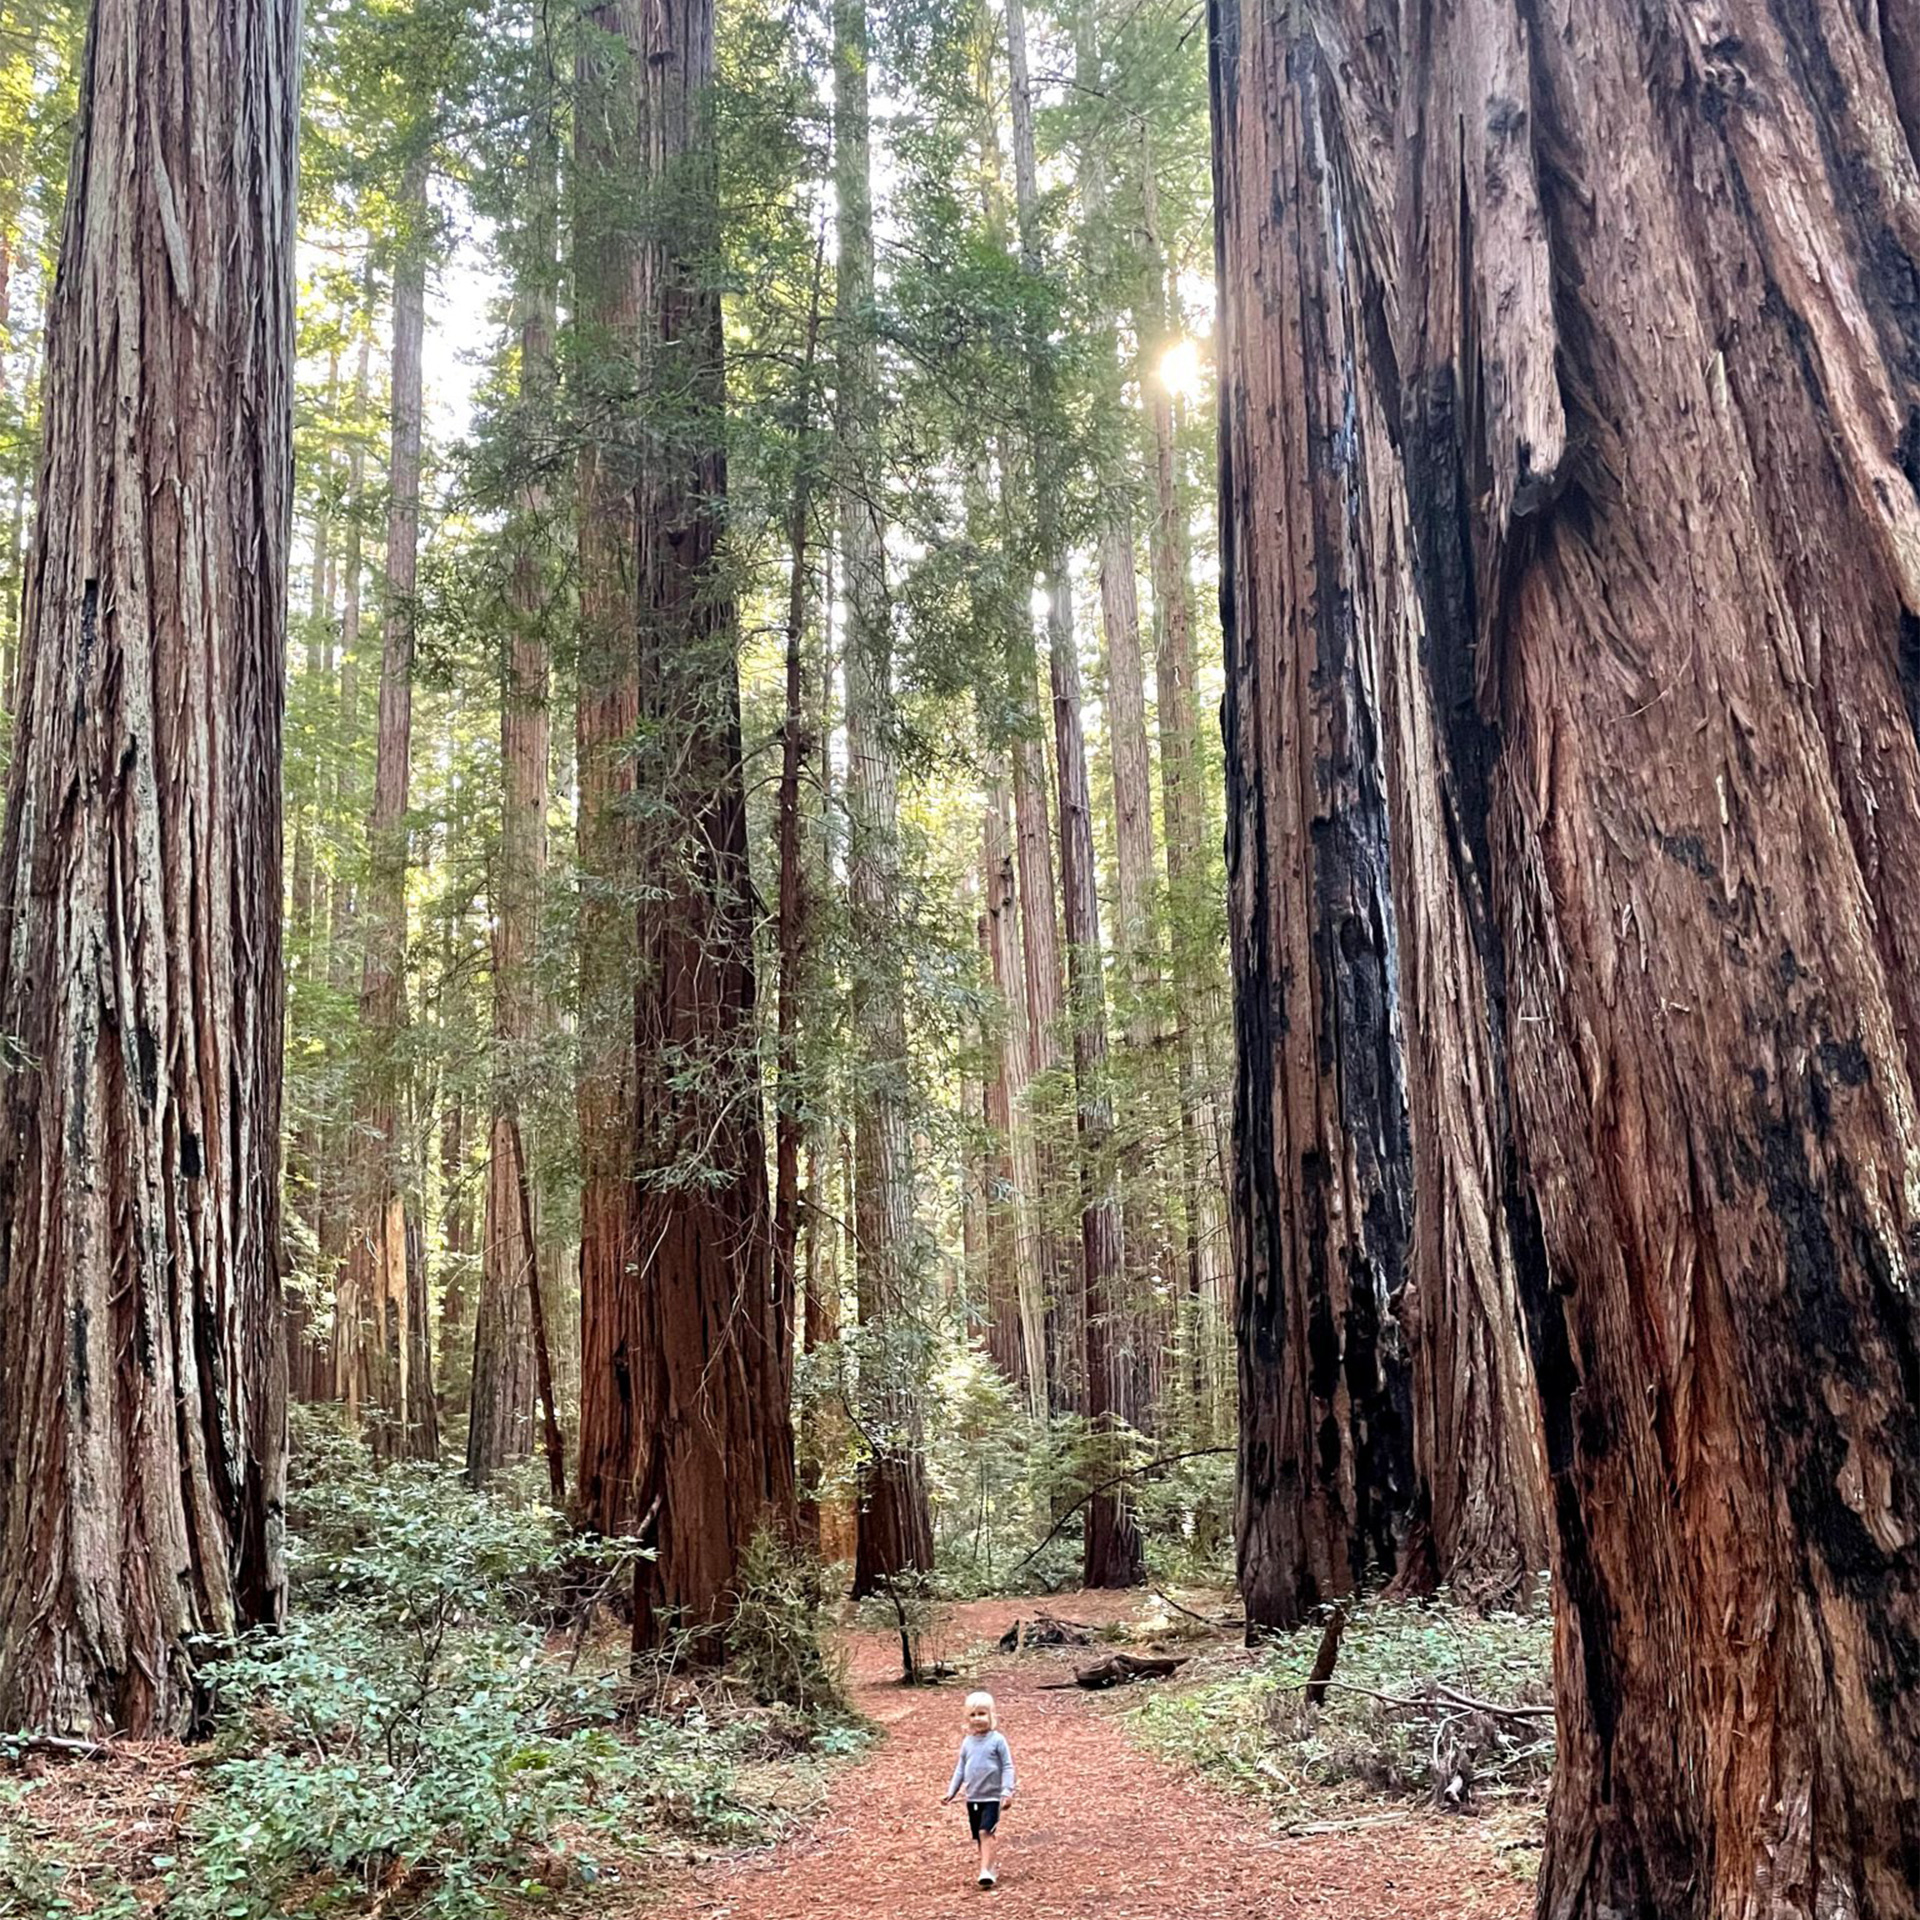 A child walking on a path through redwood trees.